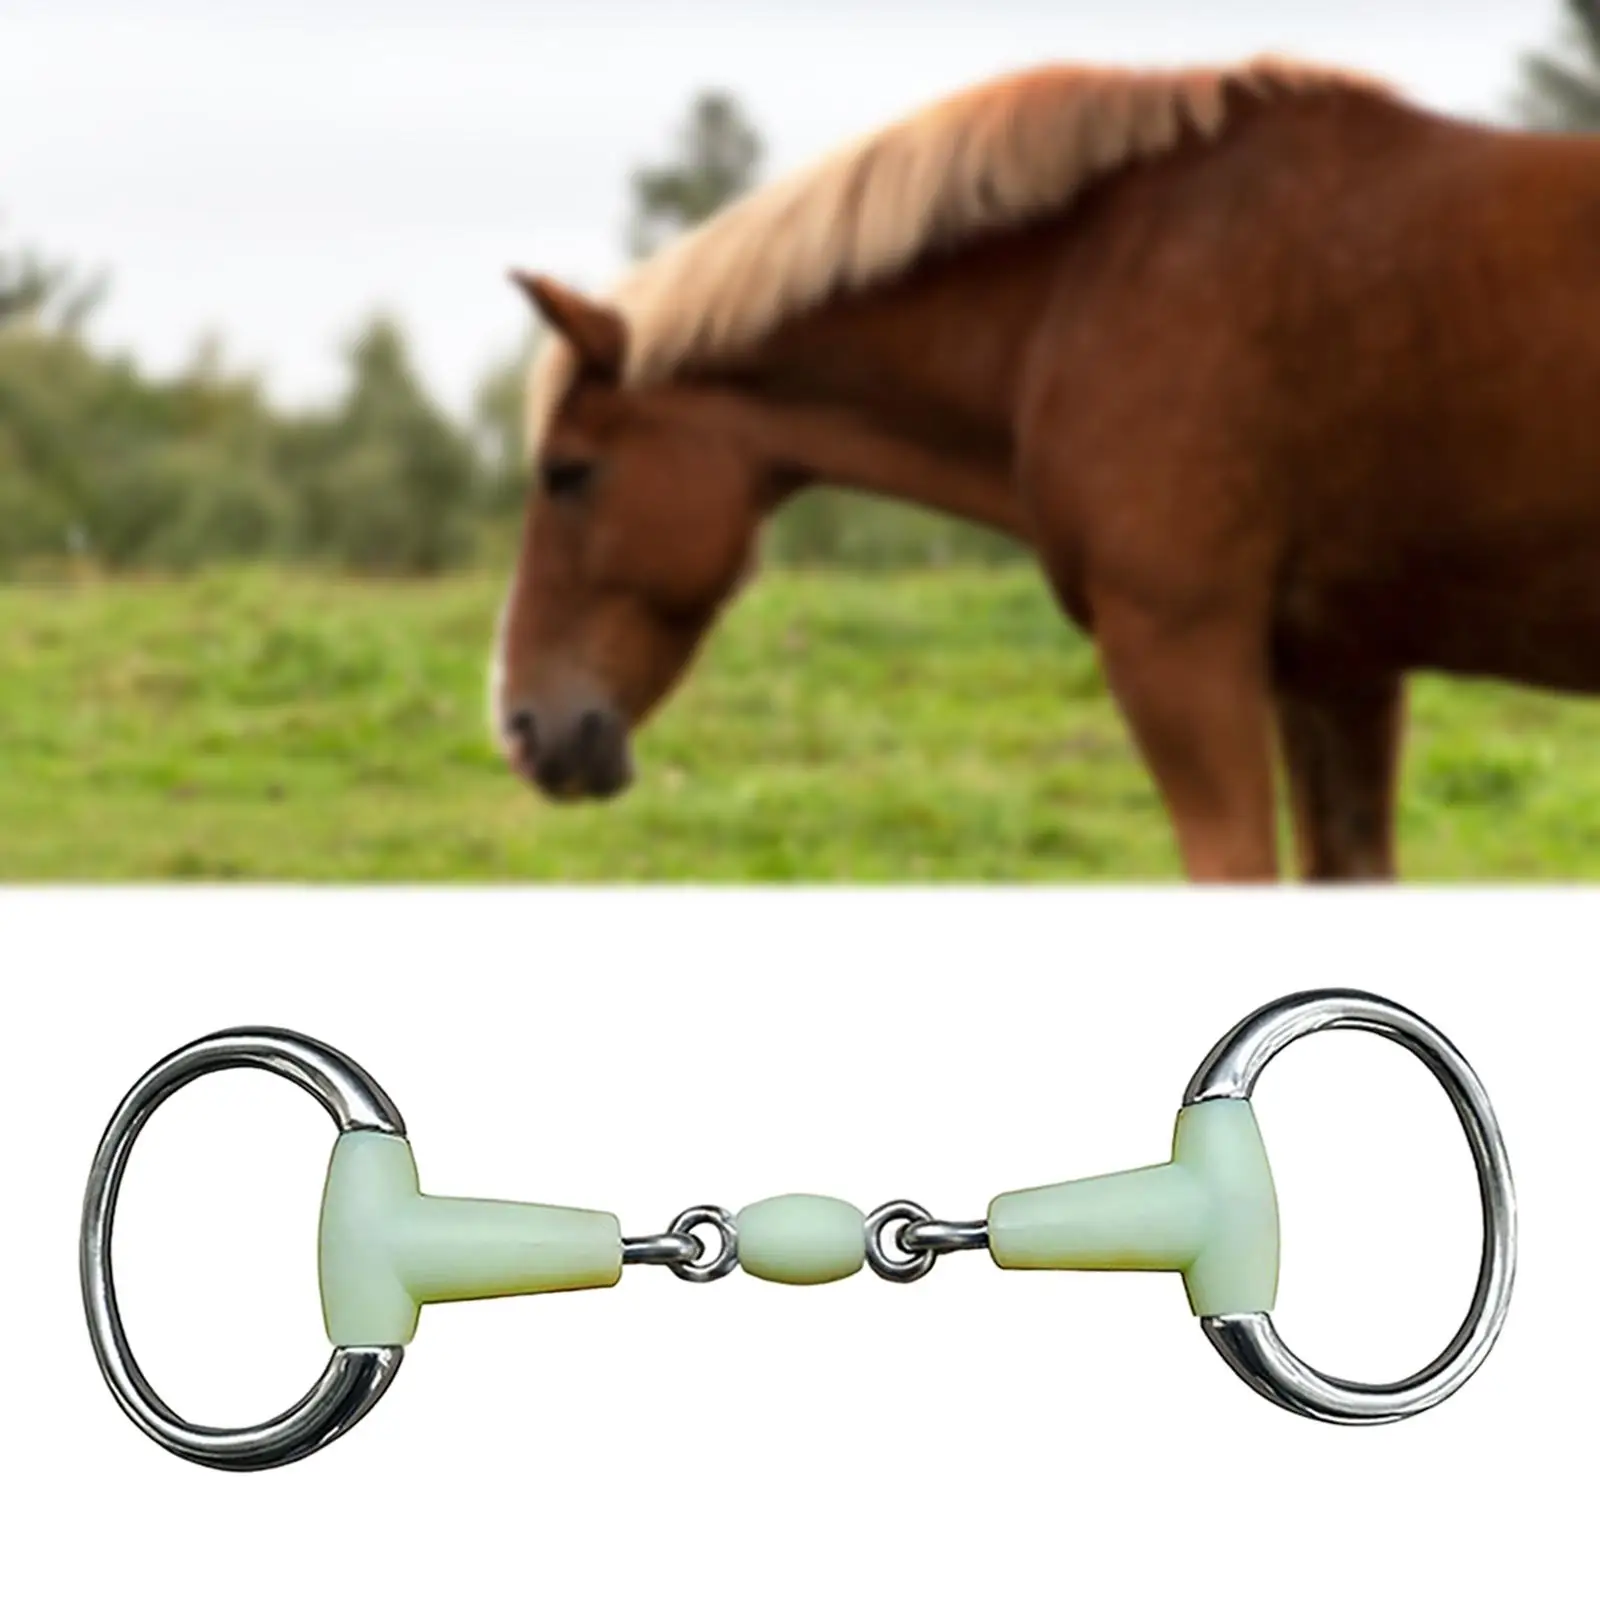 Horse Bit Mouth, Horse Training, Stainless Steel Wear Resistant Heavy Duty for Outdoor Horse Riding Gear